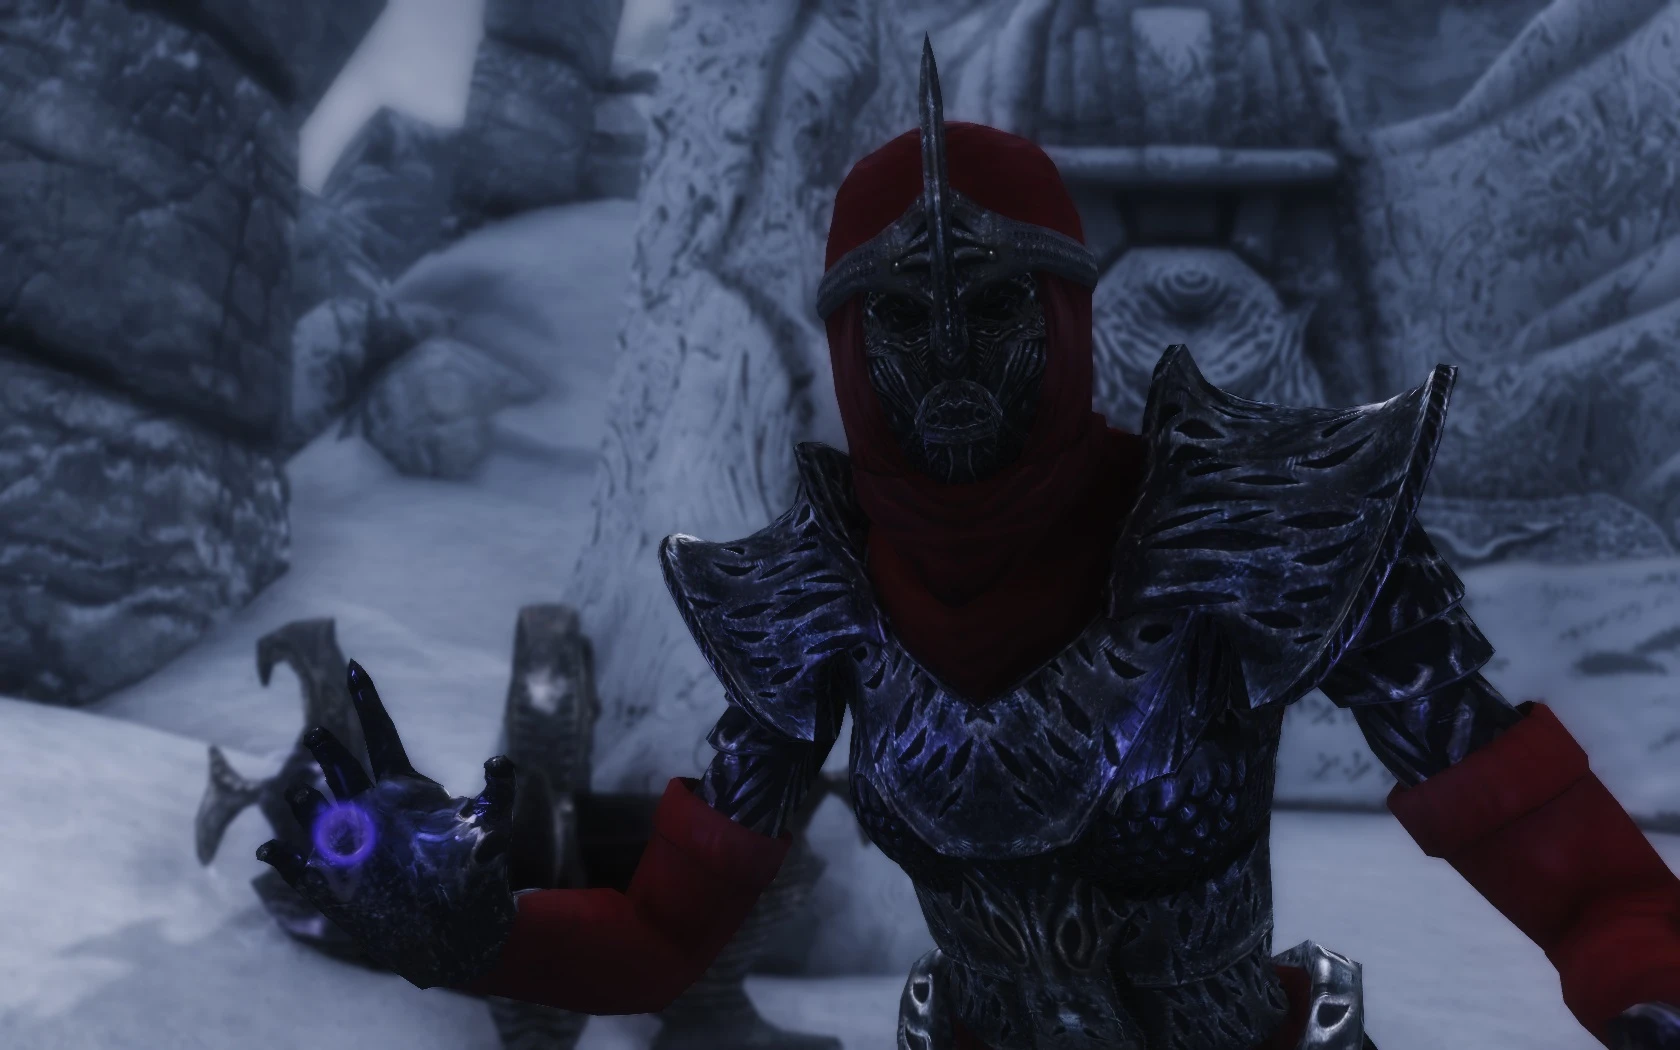 Mythic Dawn armor at Skyrim Nexus - Mods and Community. source: staticdeliv...